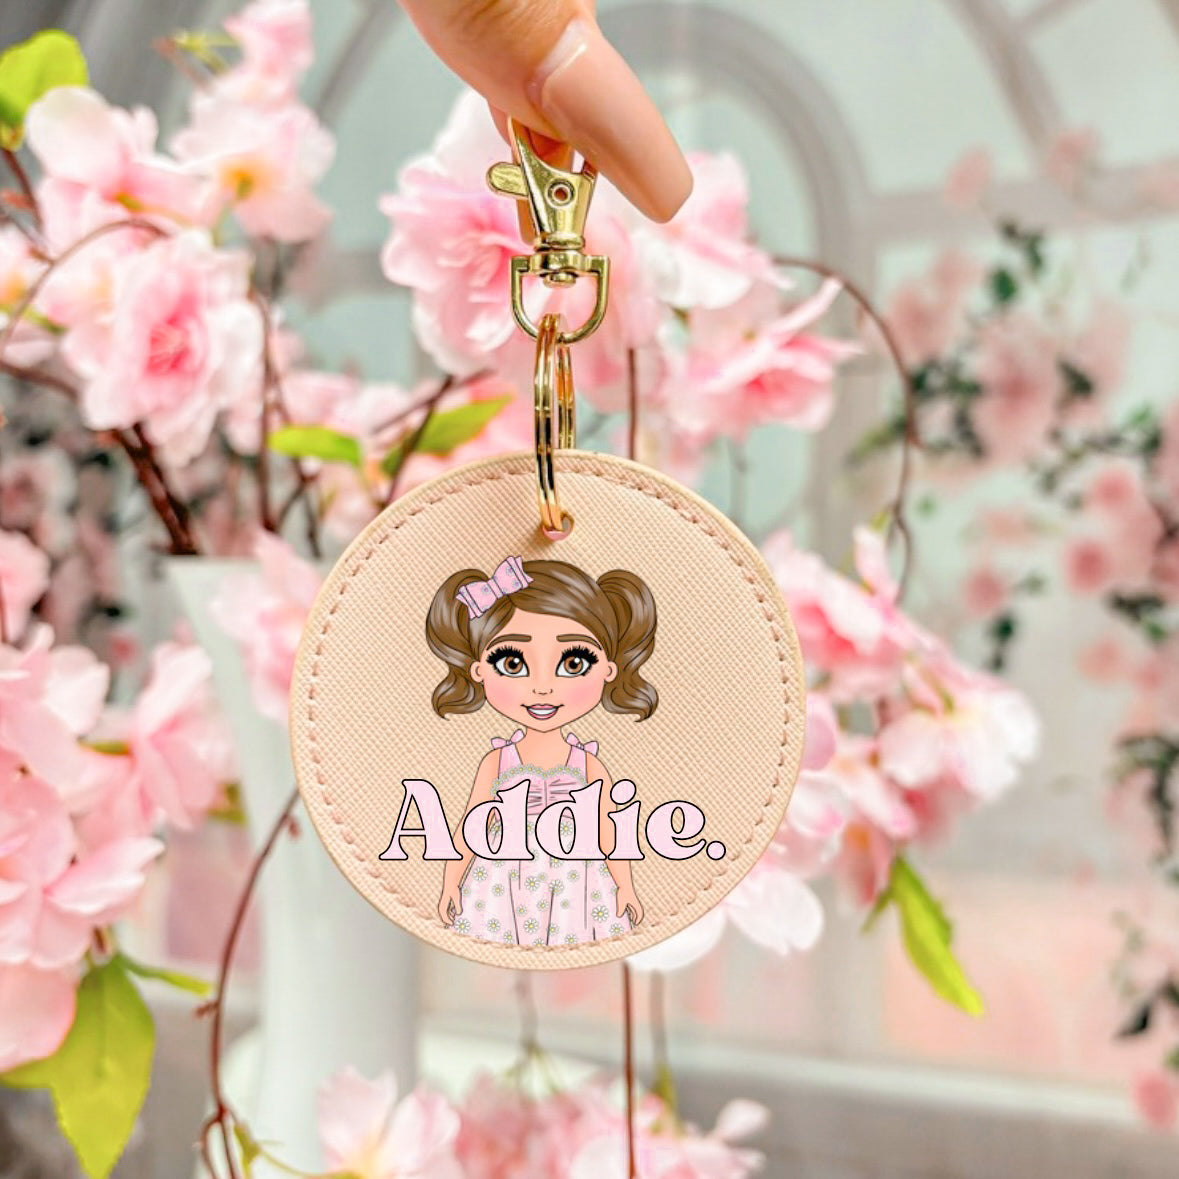 DTF TRANSFER - PRETTY PINK DRESS DOLLY (BOUTIQUE KEYRING)